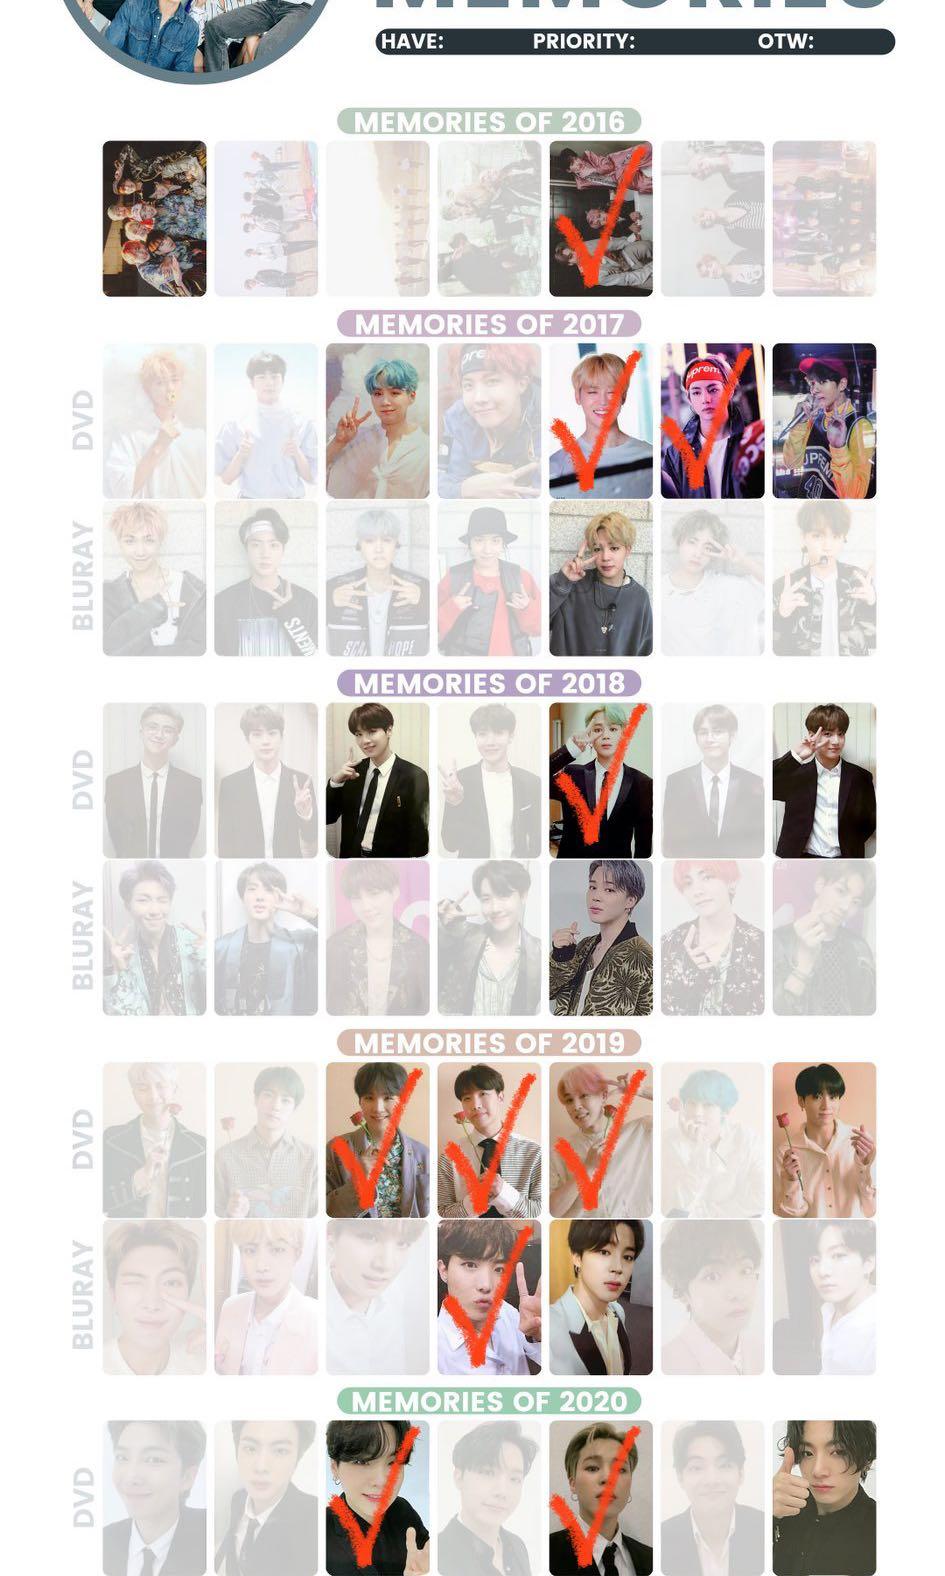 WTB/LF BTS Memories Official PC, Hobbies & Toys, Collectibles